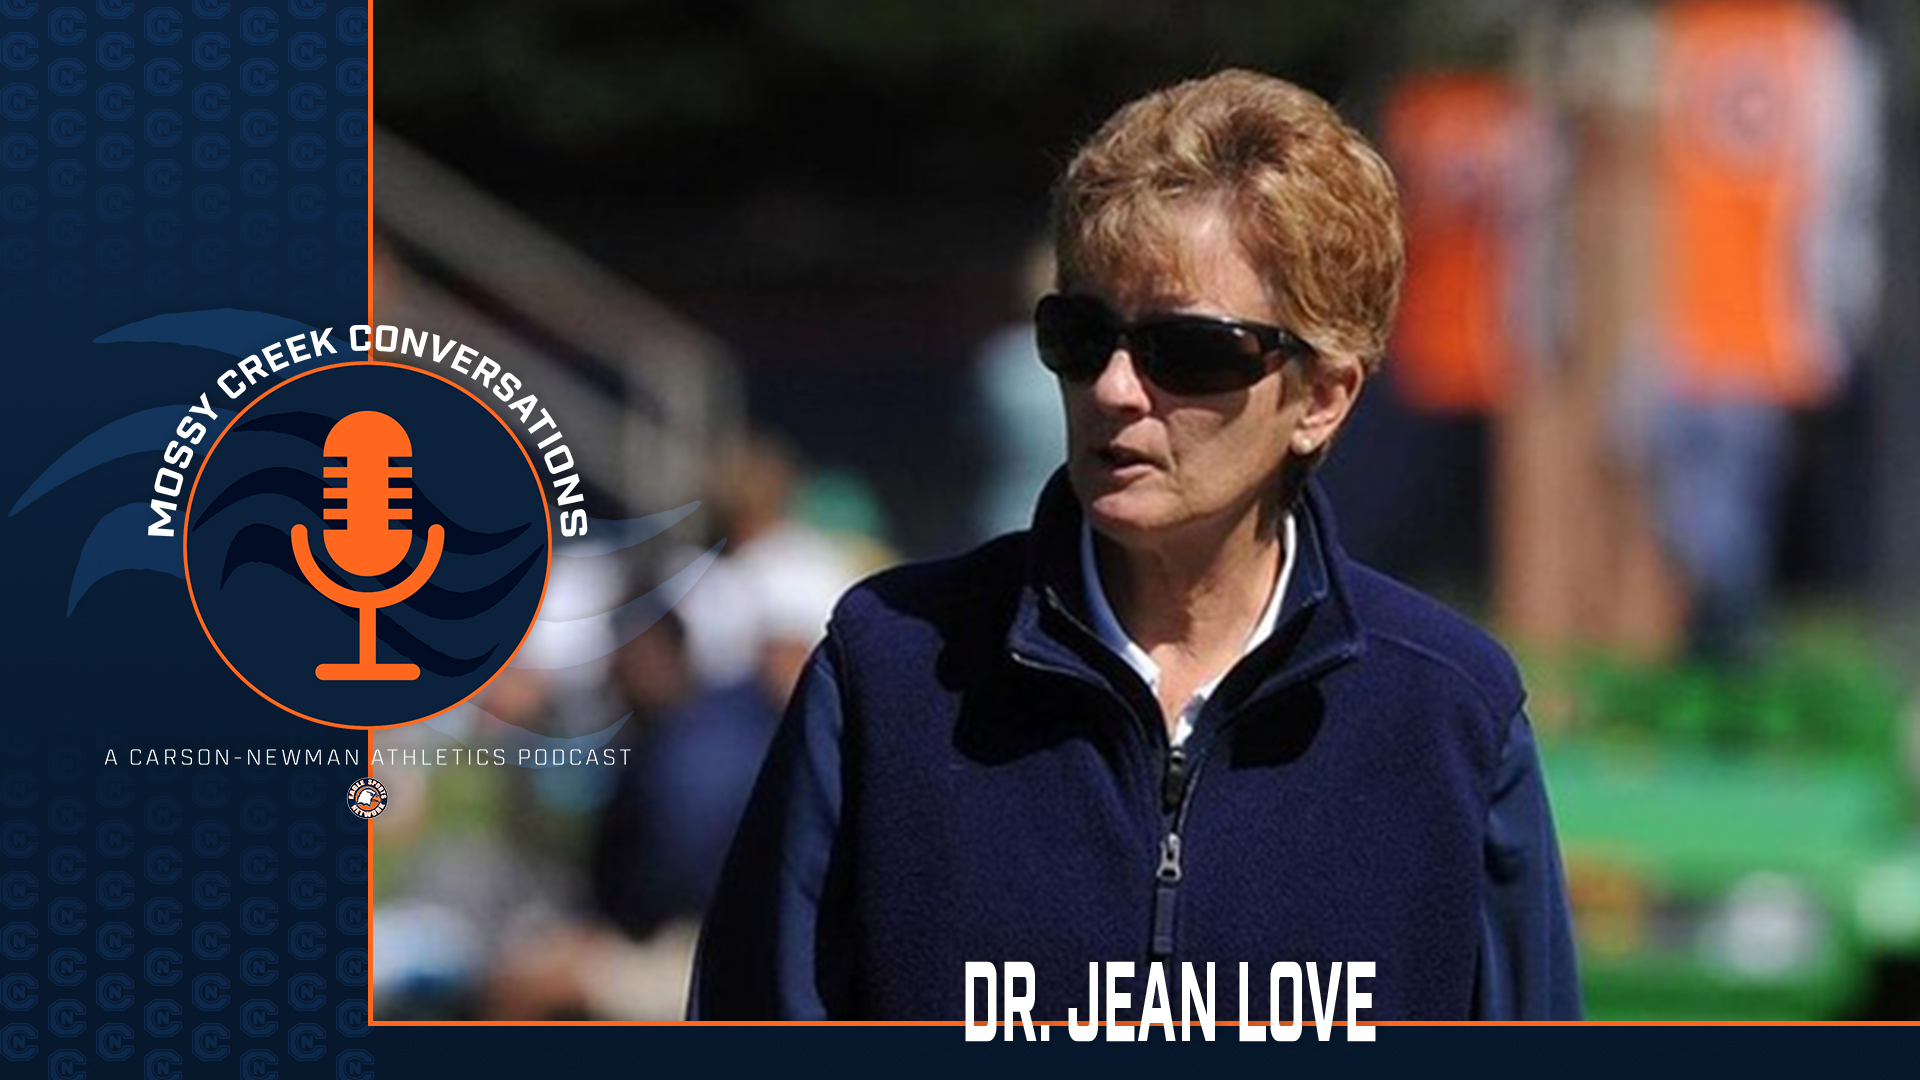 Former tennis coach Dr. Jean Love joins Mossy Creek Conversations